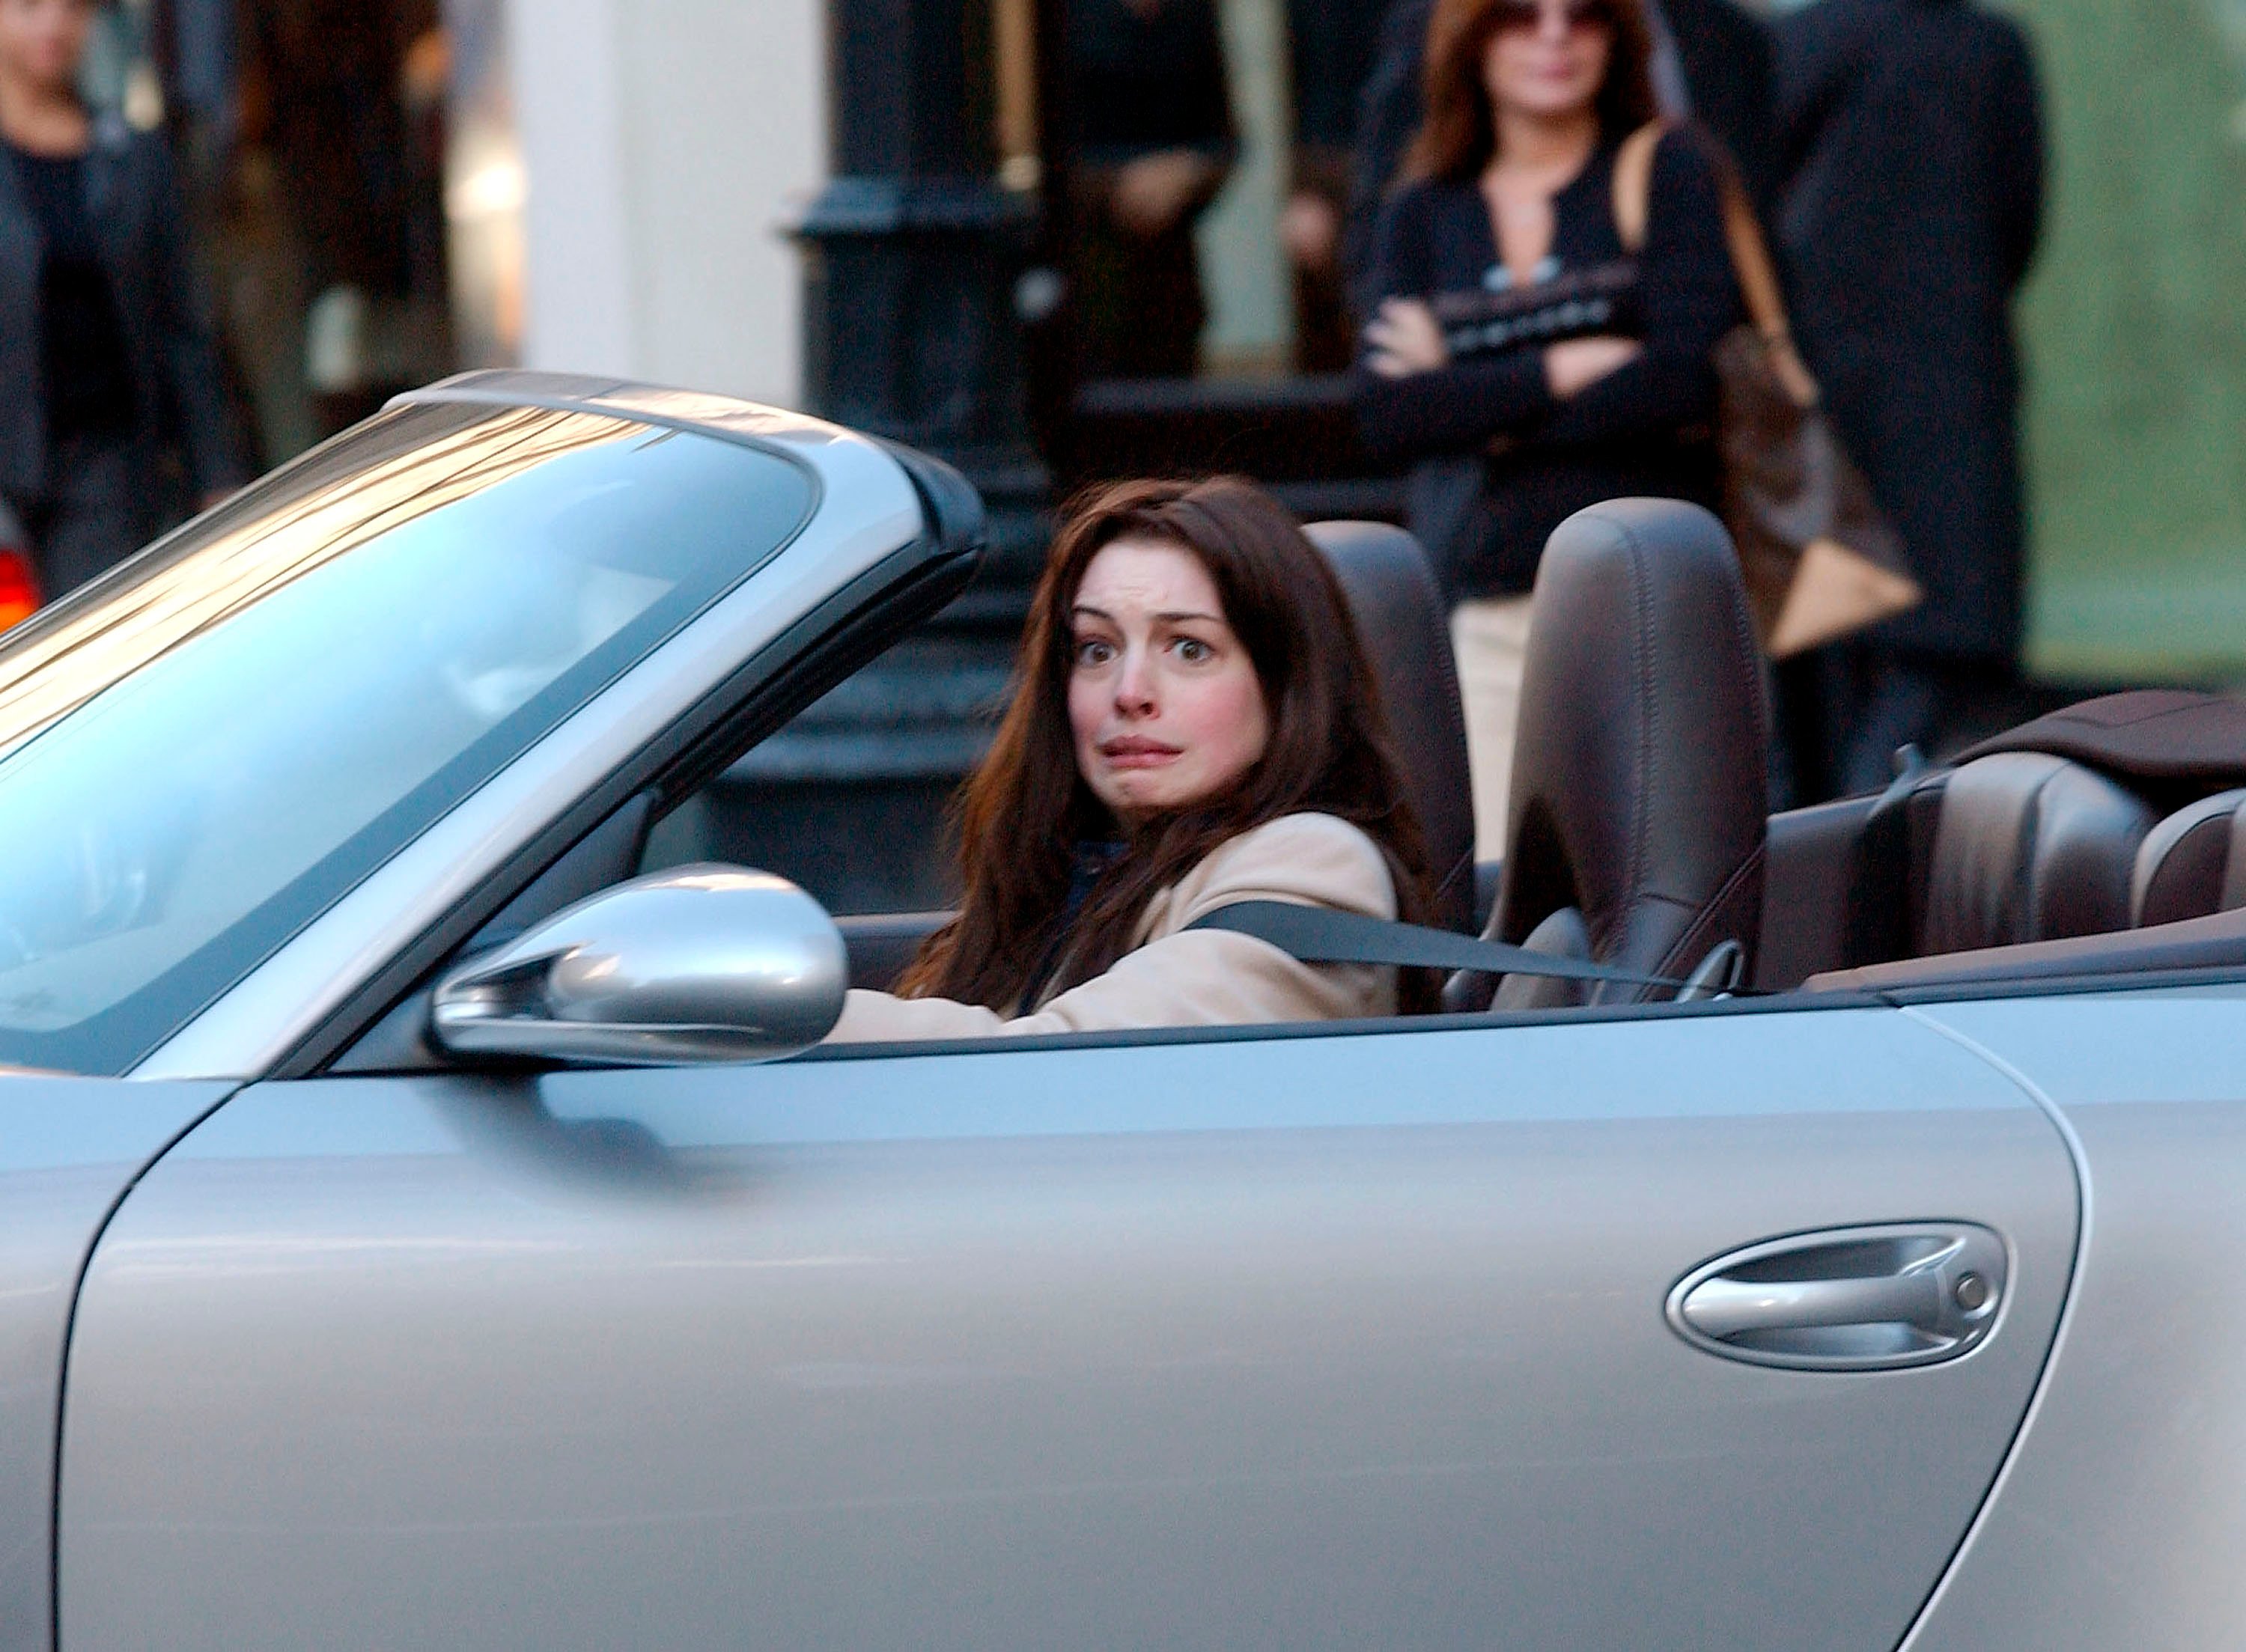 Anne Hathaway shoots a scene for the movie 'The Devil Wears Prada'